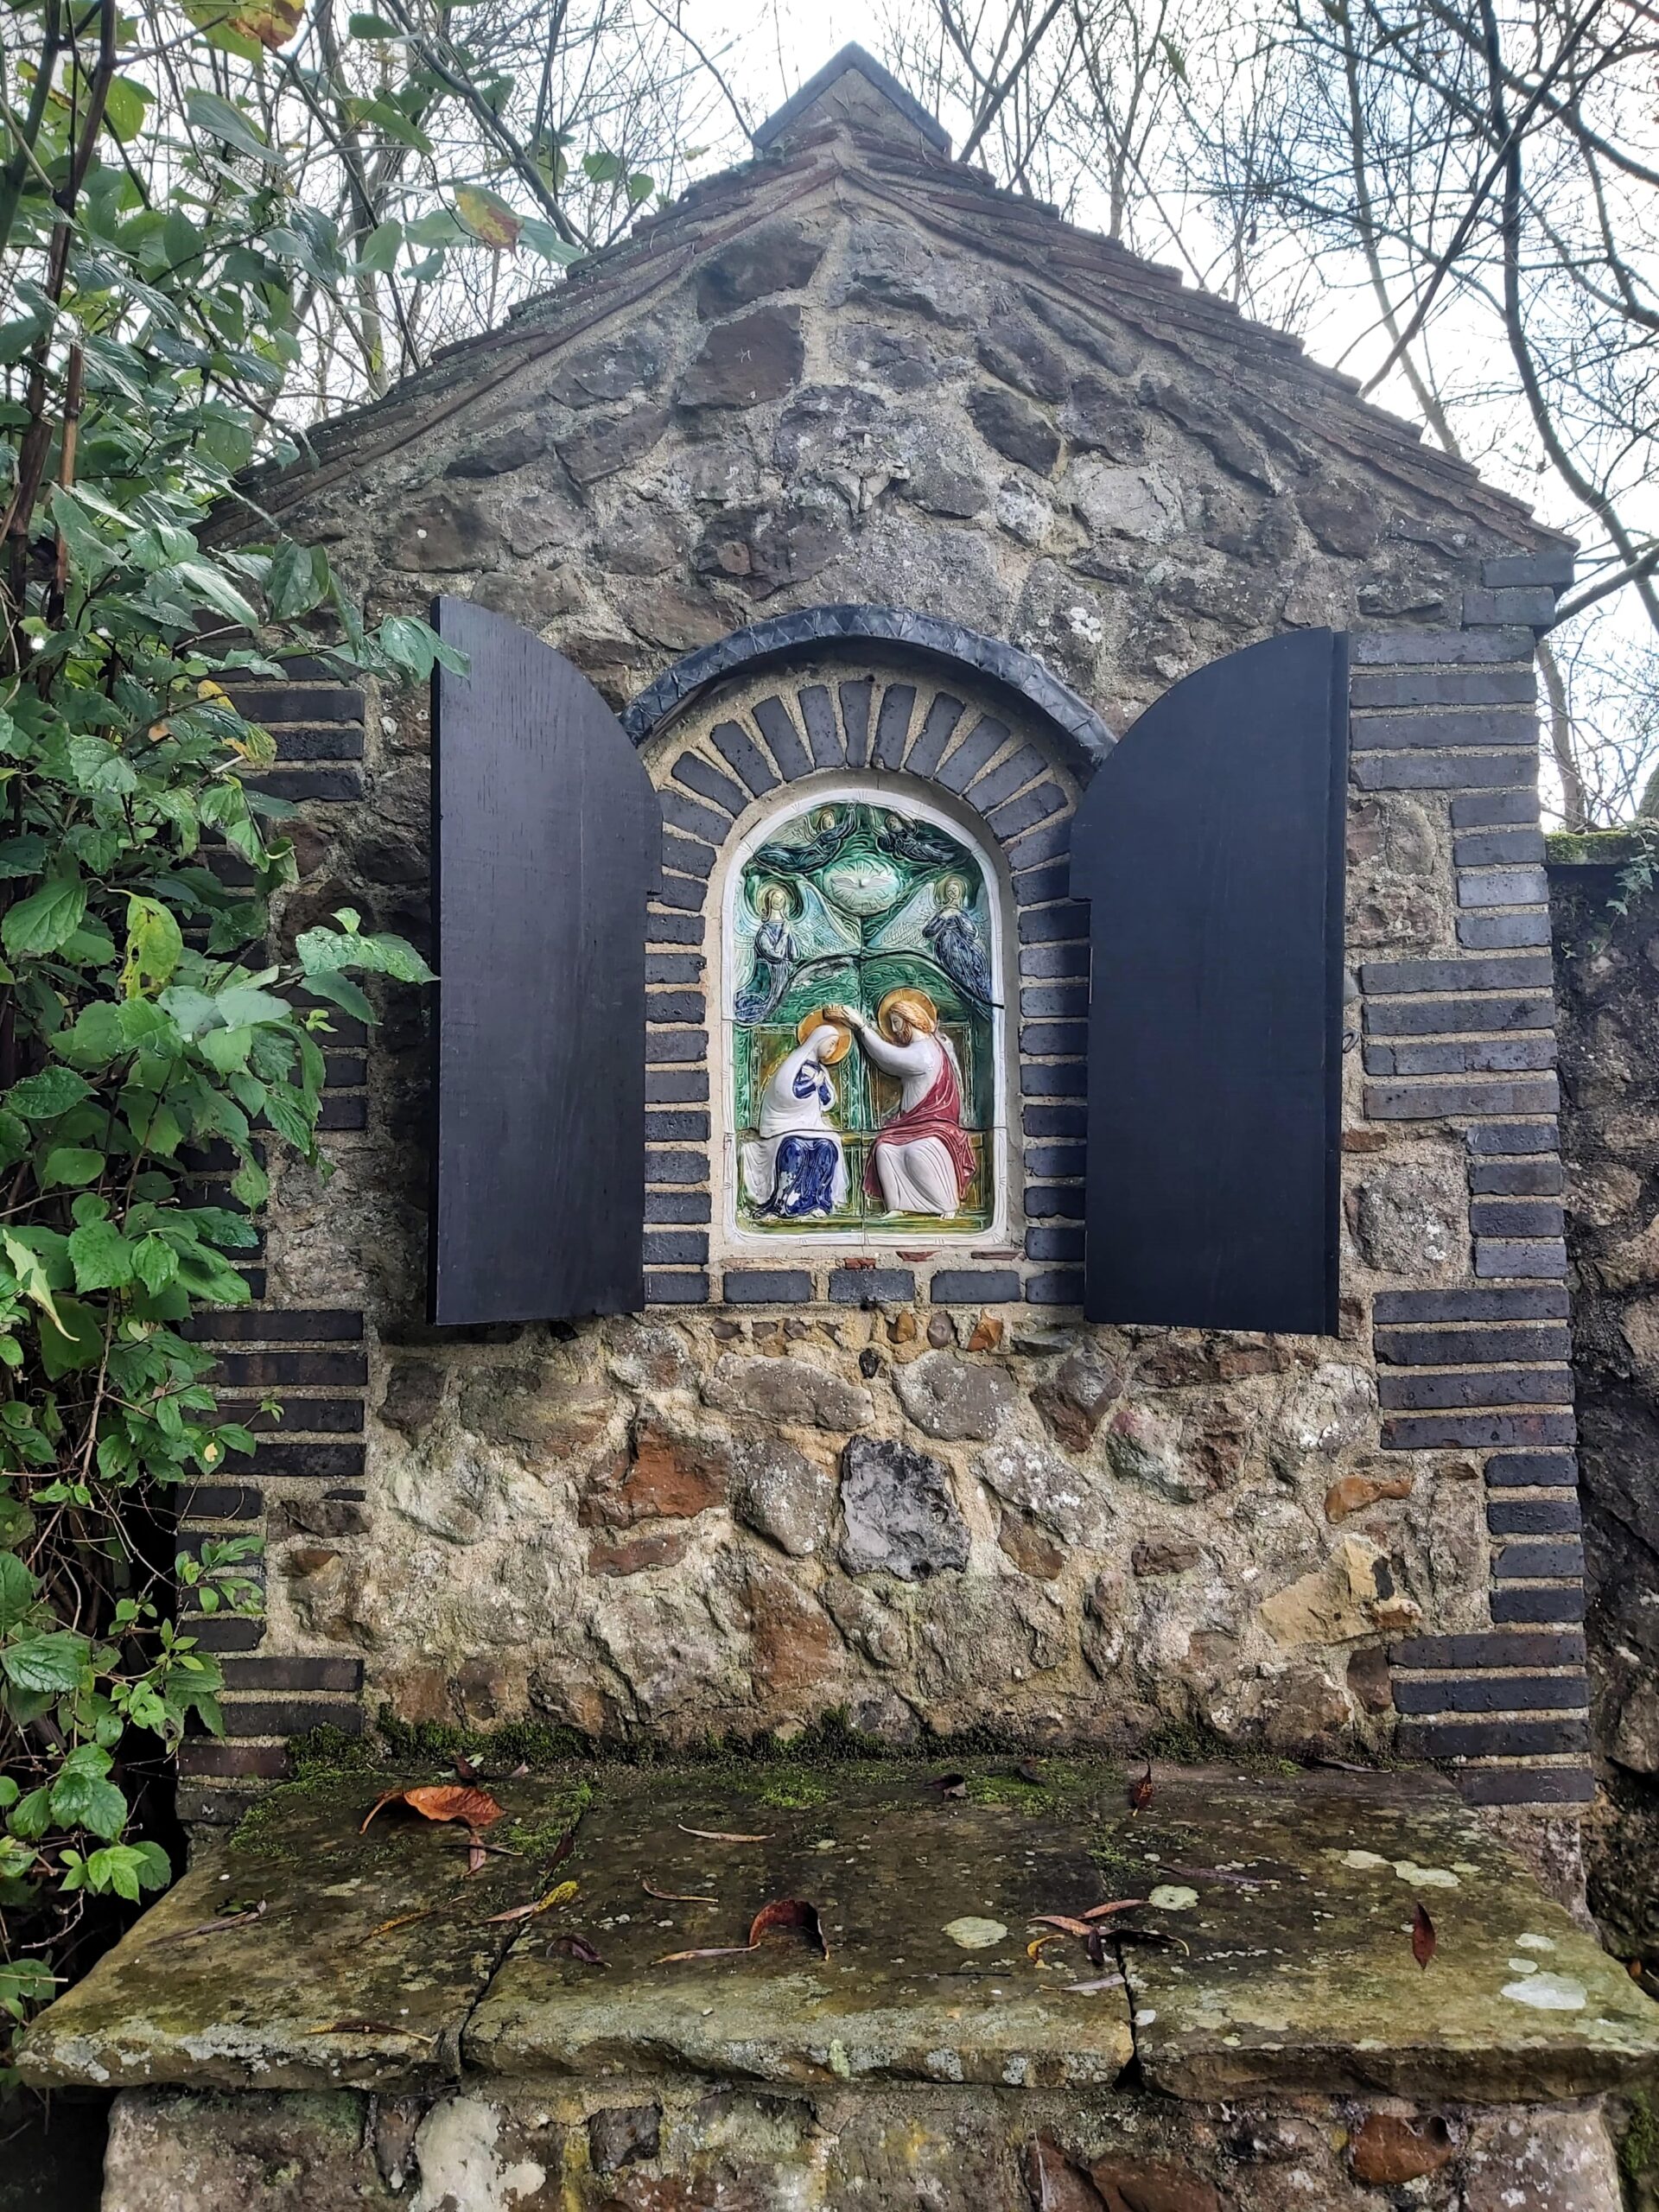 Religious art in the garden of The Friars Aylesford Priory, Kent, England